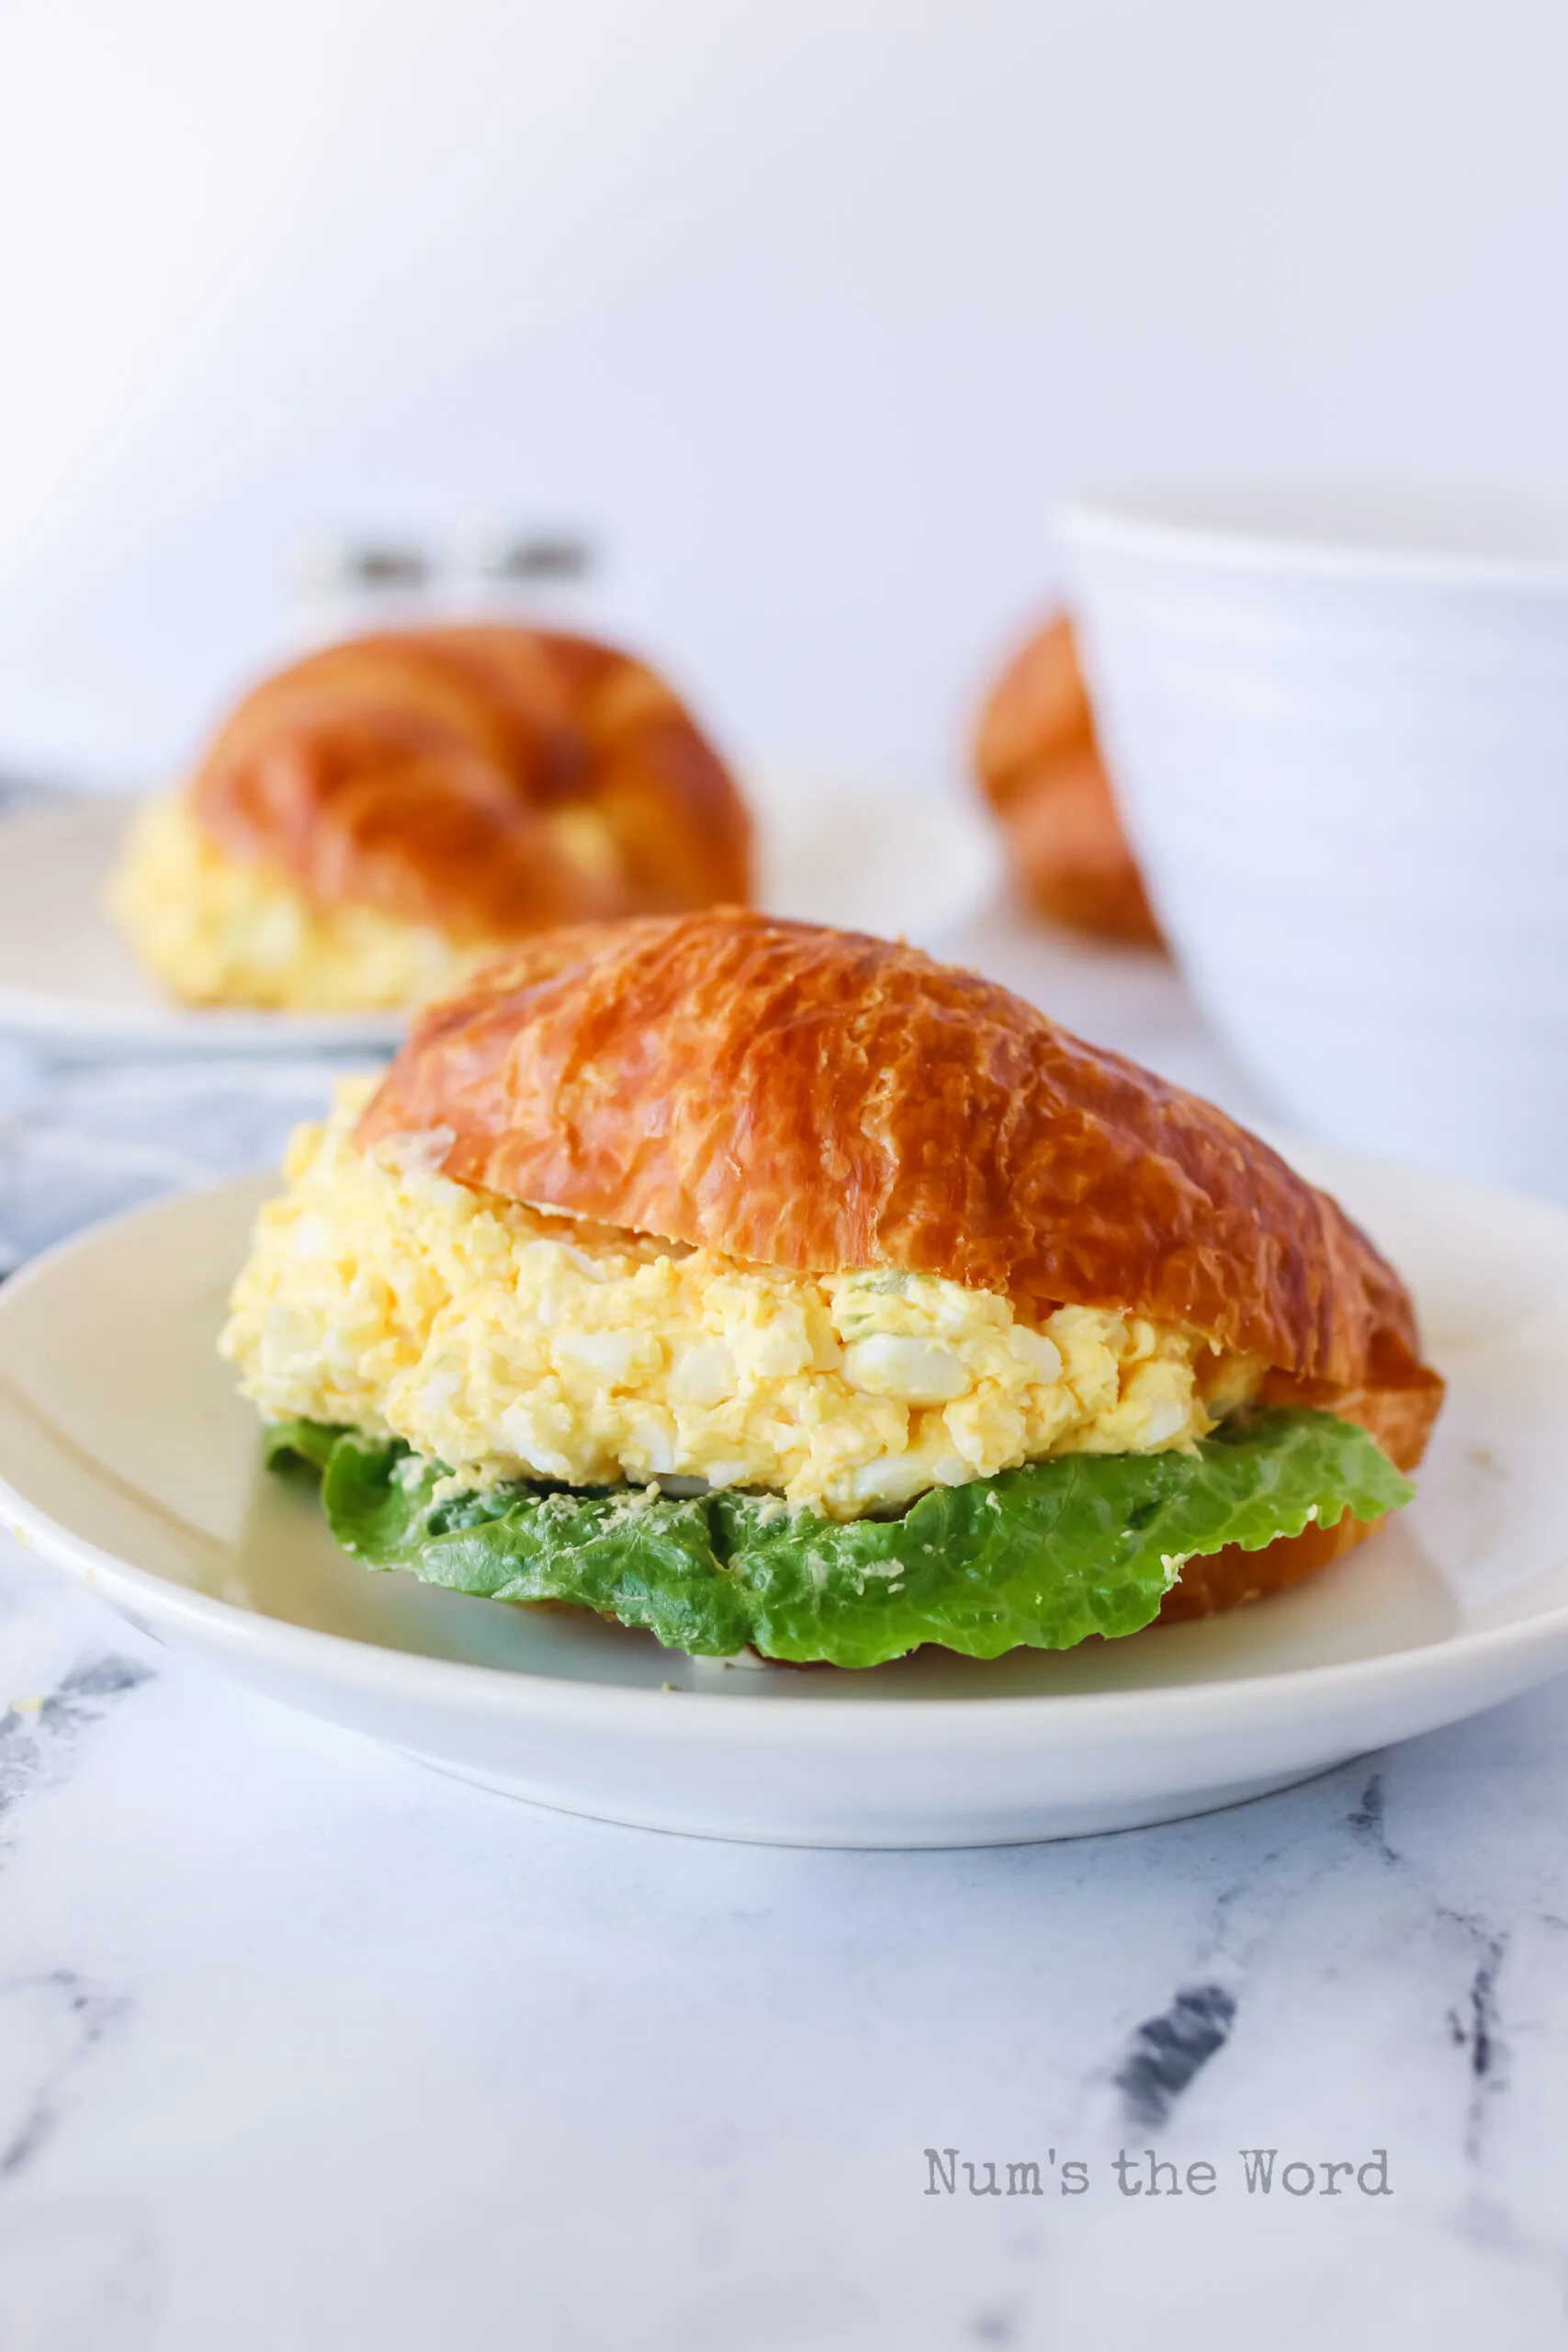 zoomed out image of two egg salad sandwiches on plates both with lettuce.